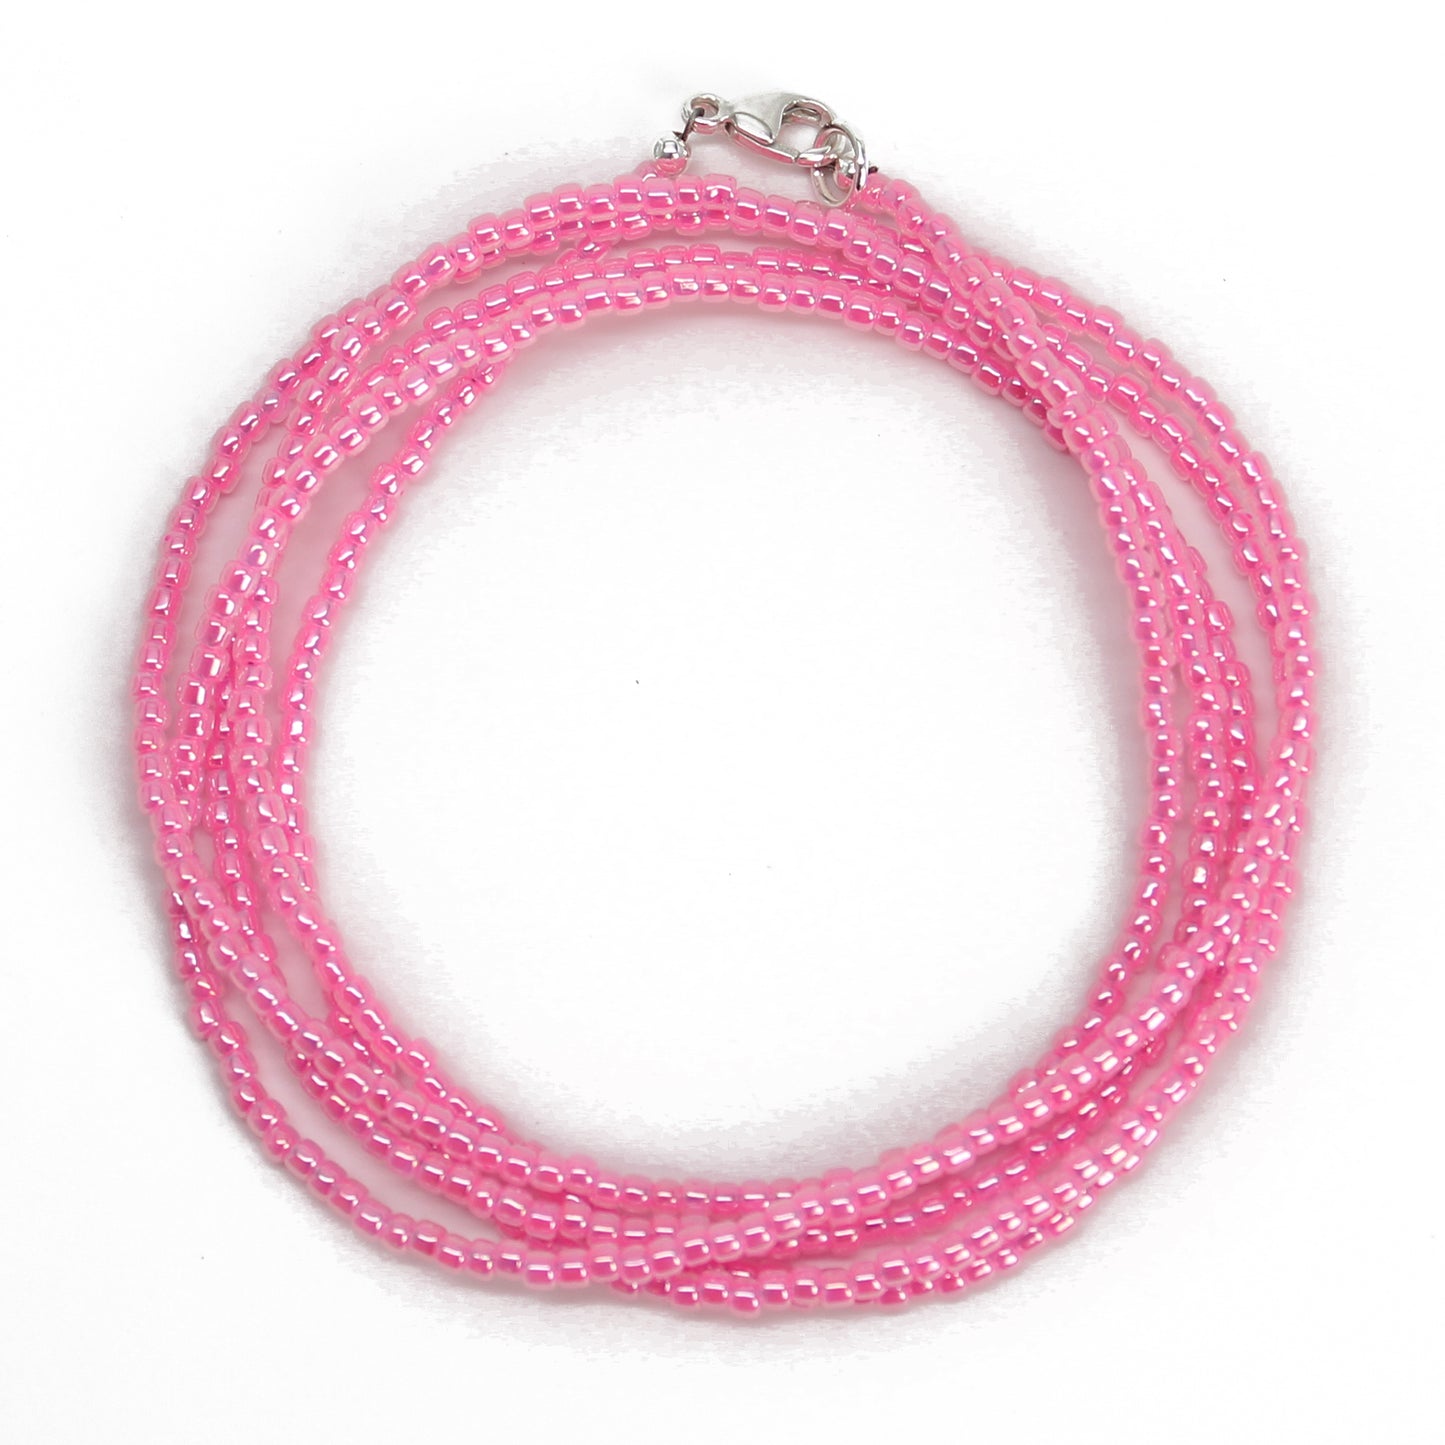 Hot Pink Seed Bead Necklace, Thin 1.5mm Single Strand Beaded Necklace